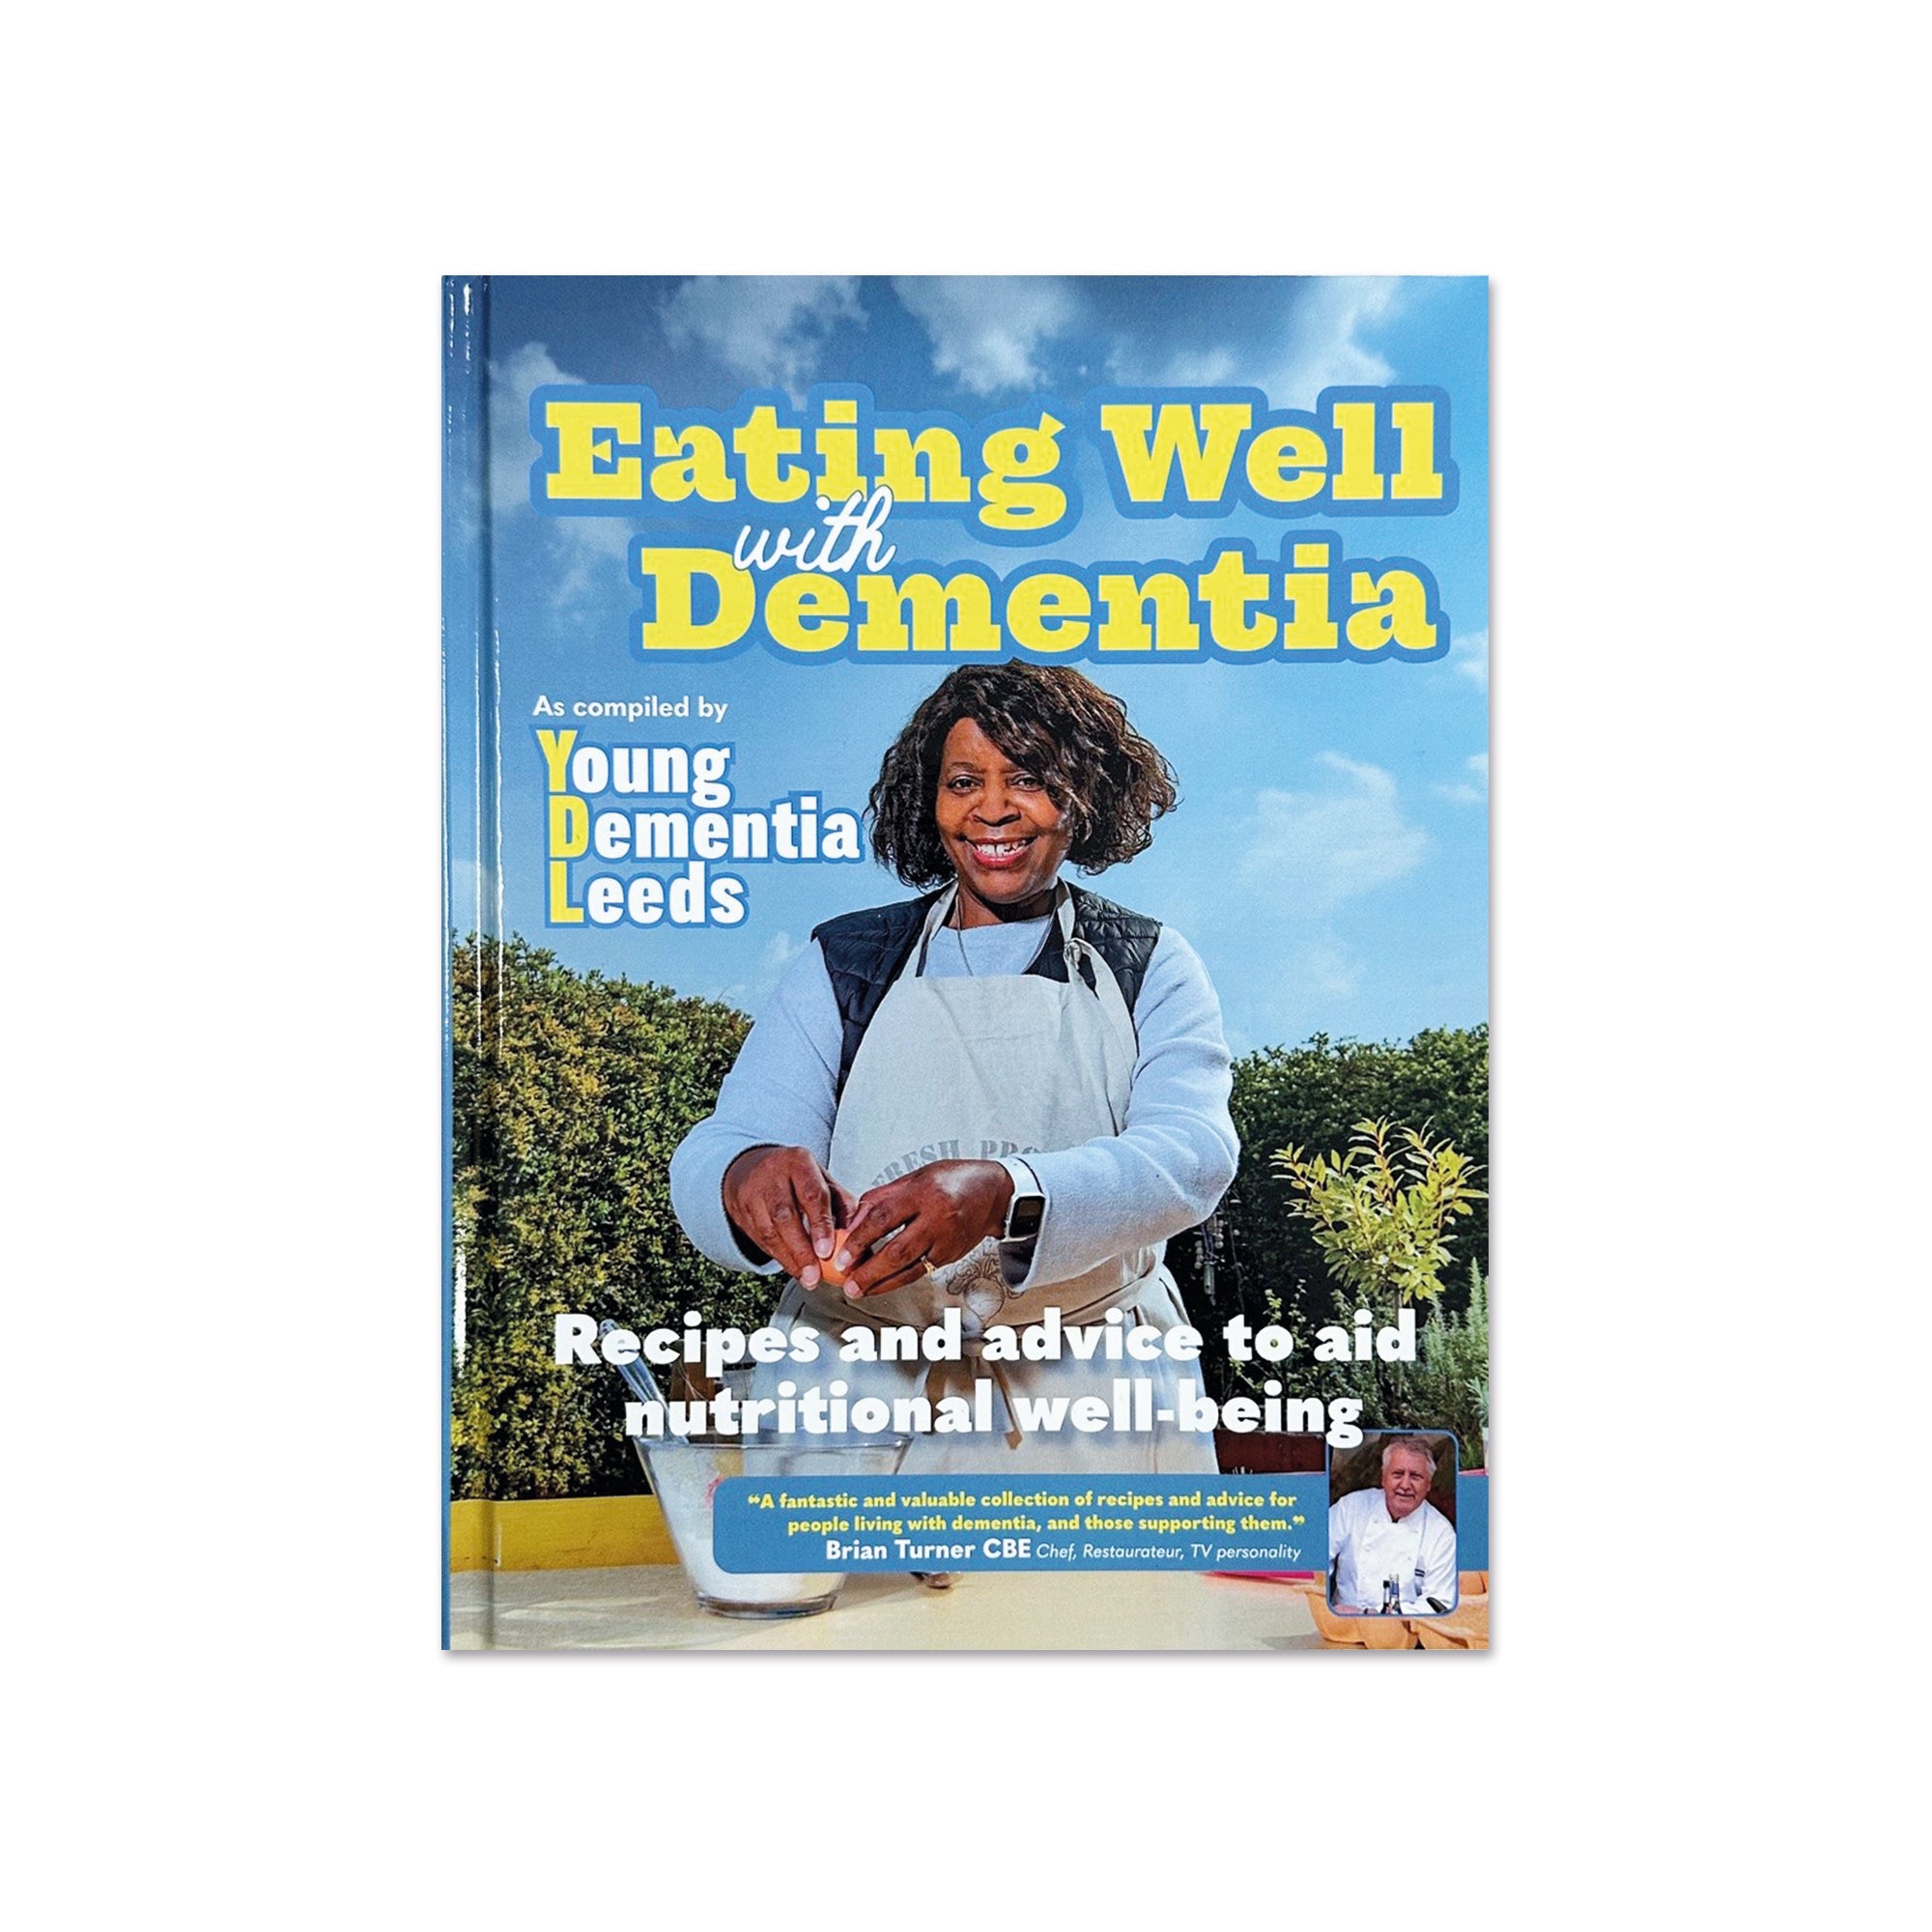 Eating well with dementia - edited by Liz Menacer